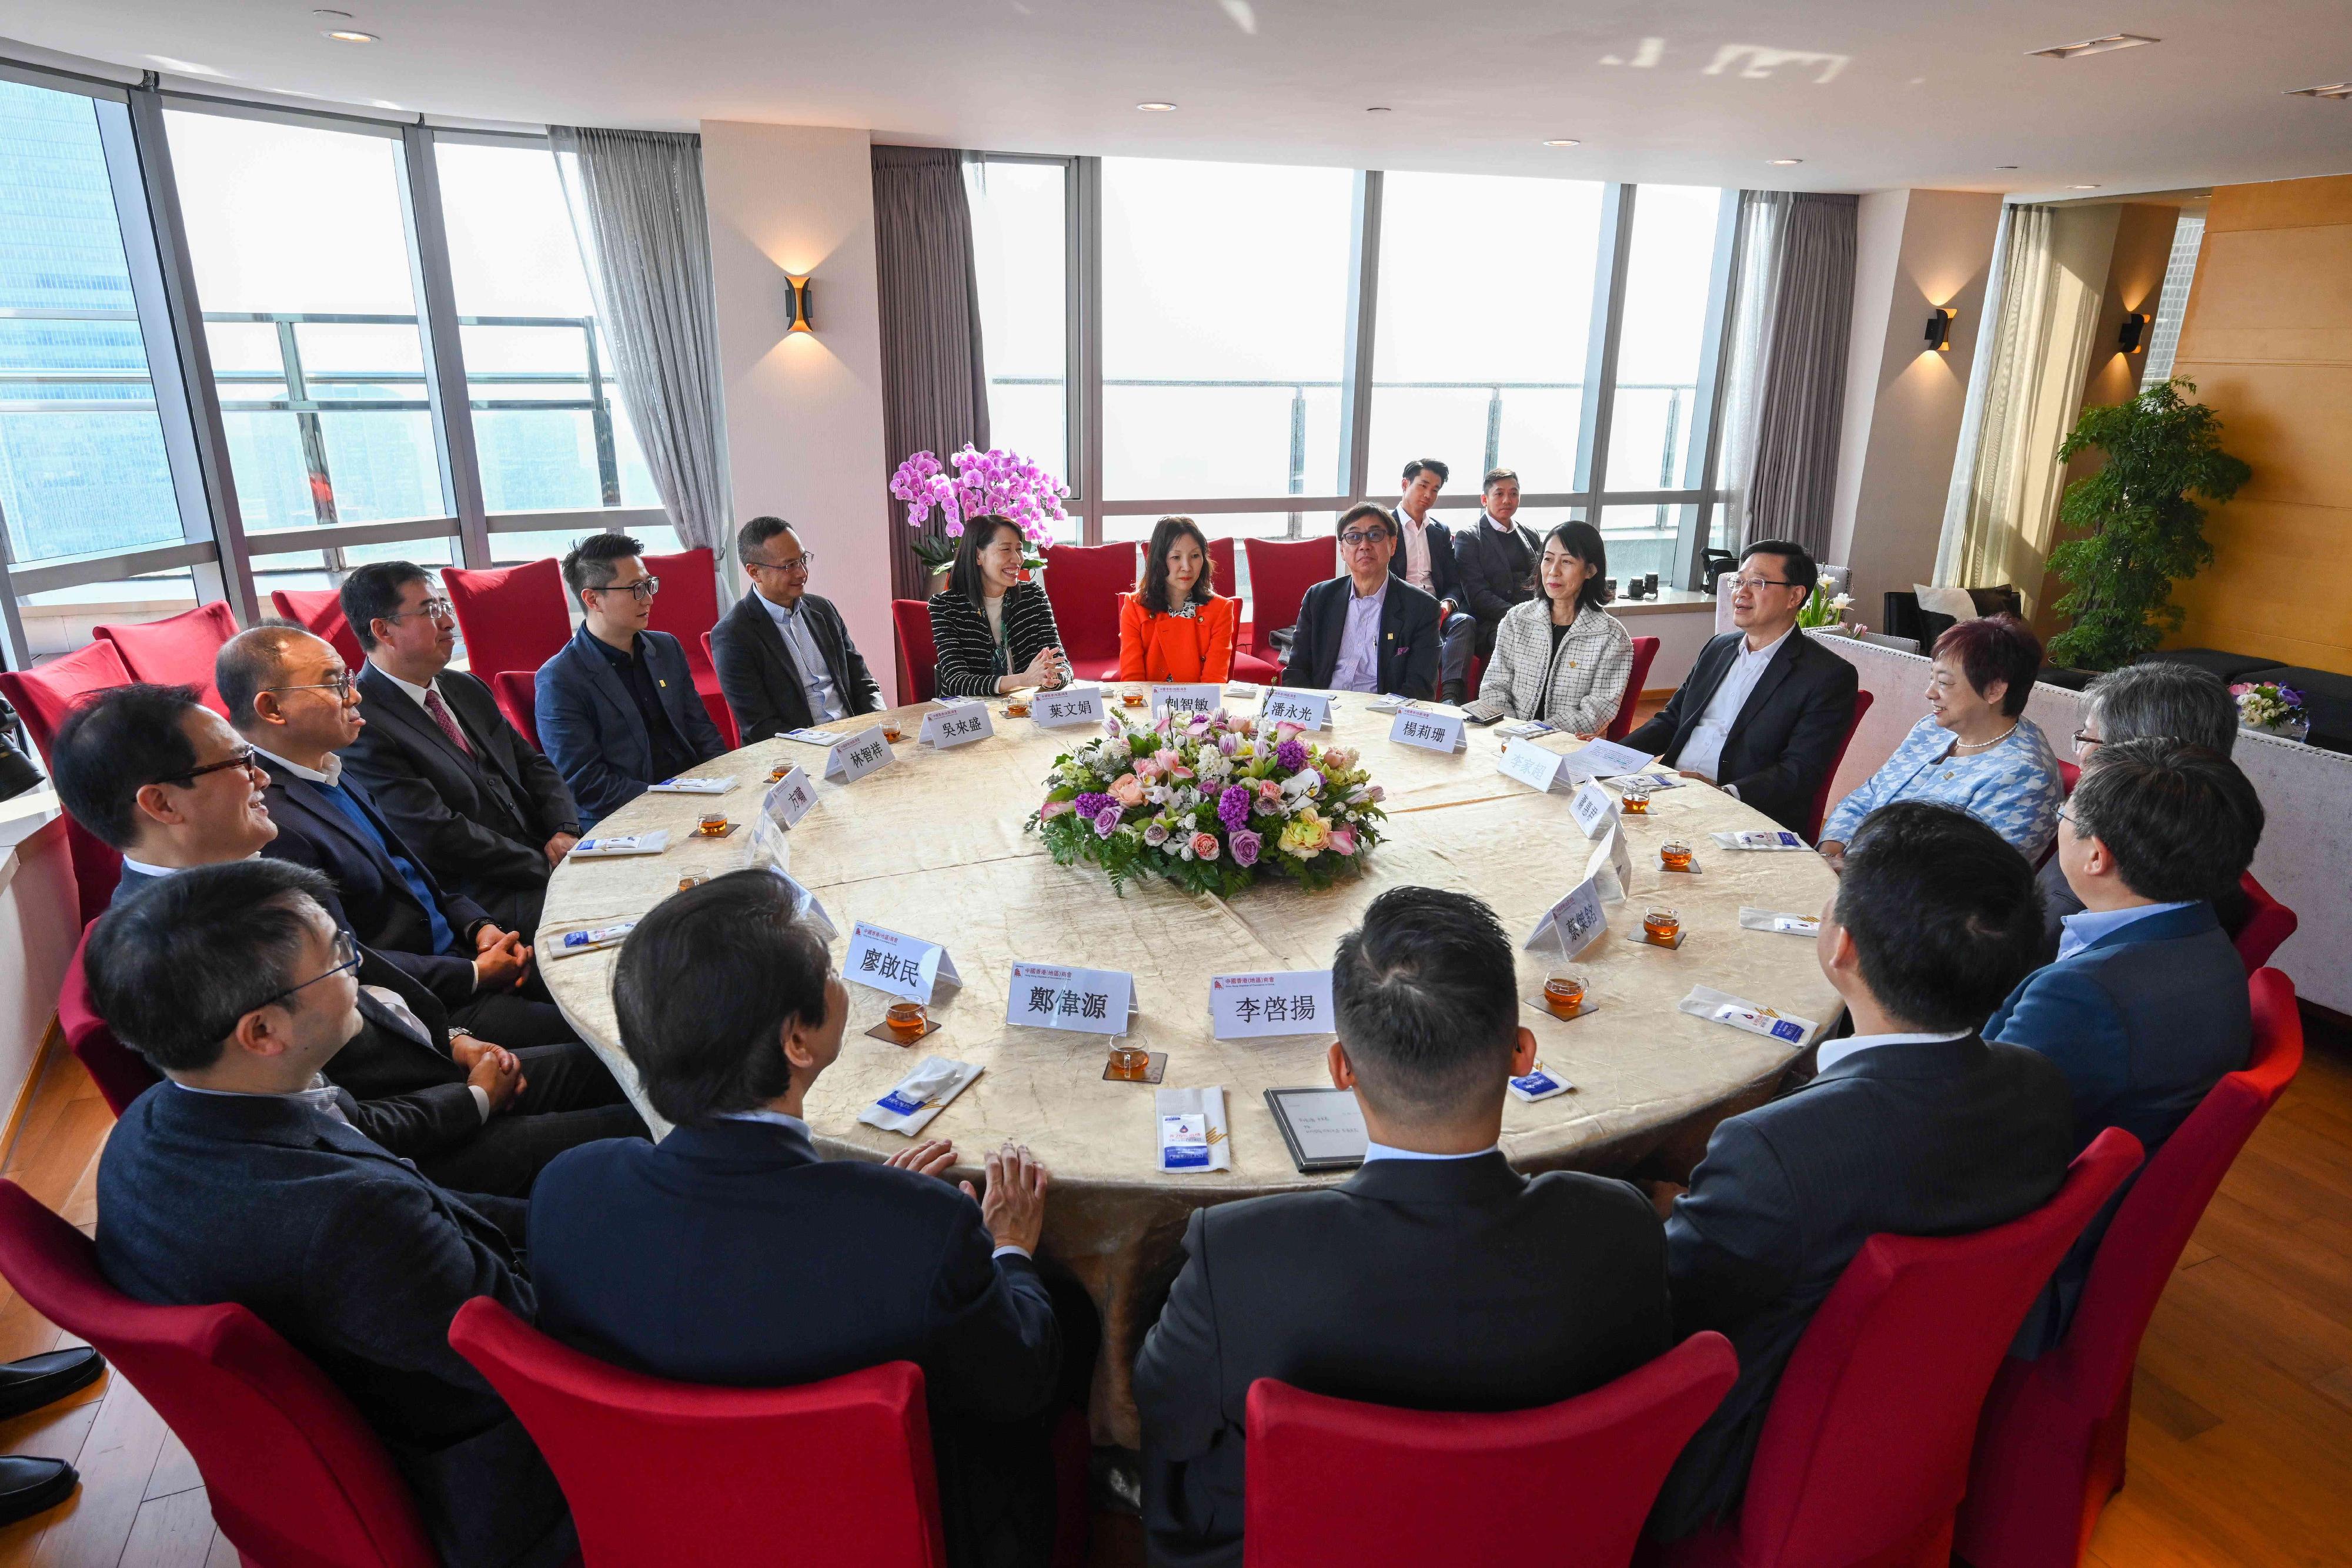 The Chief Executive, Mr John Lee (second right), attends a tea gathering in Beijing with members of the Hong Kong Chamber of Commerce in China this afternoon (March 13).